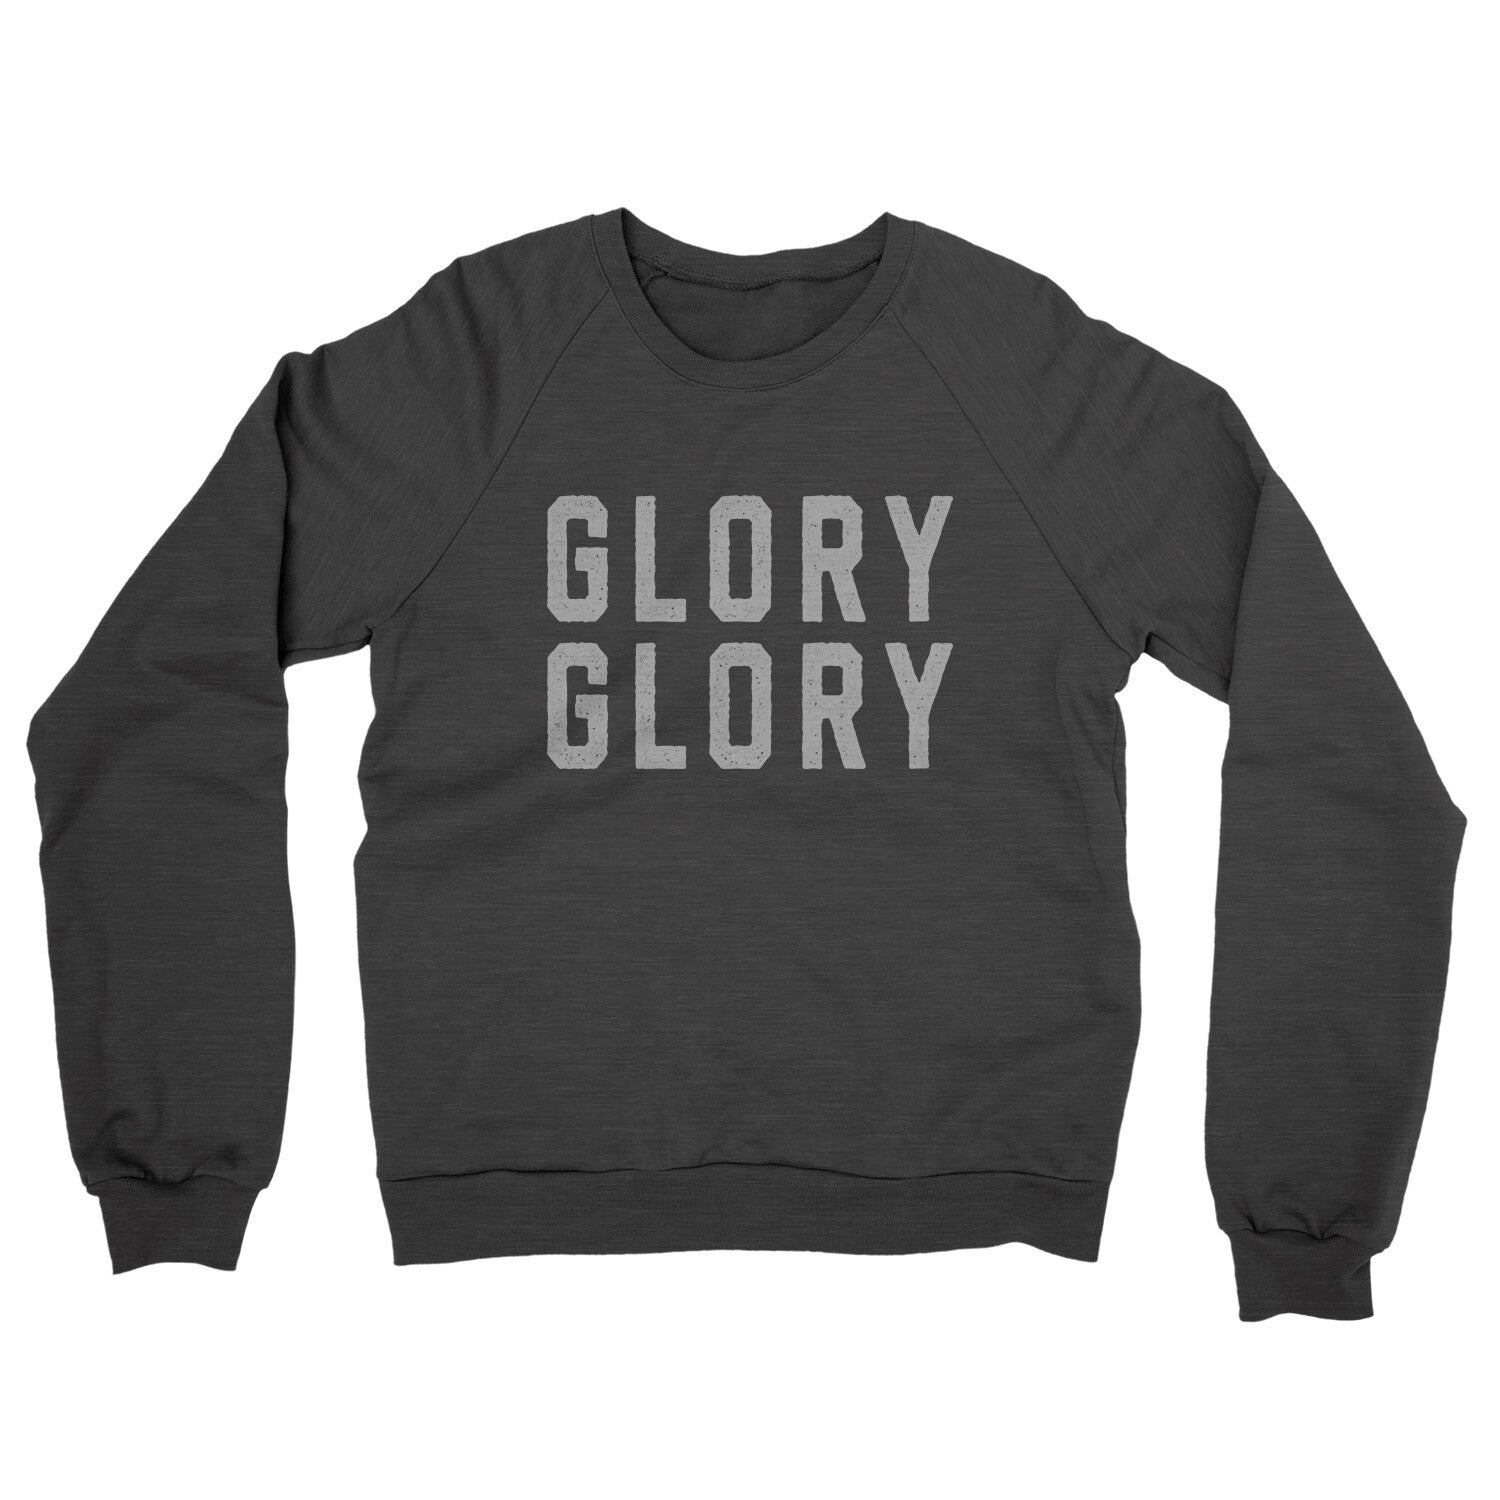 Glory Glory in Charcoal Heather Color